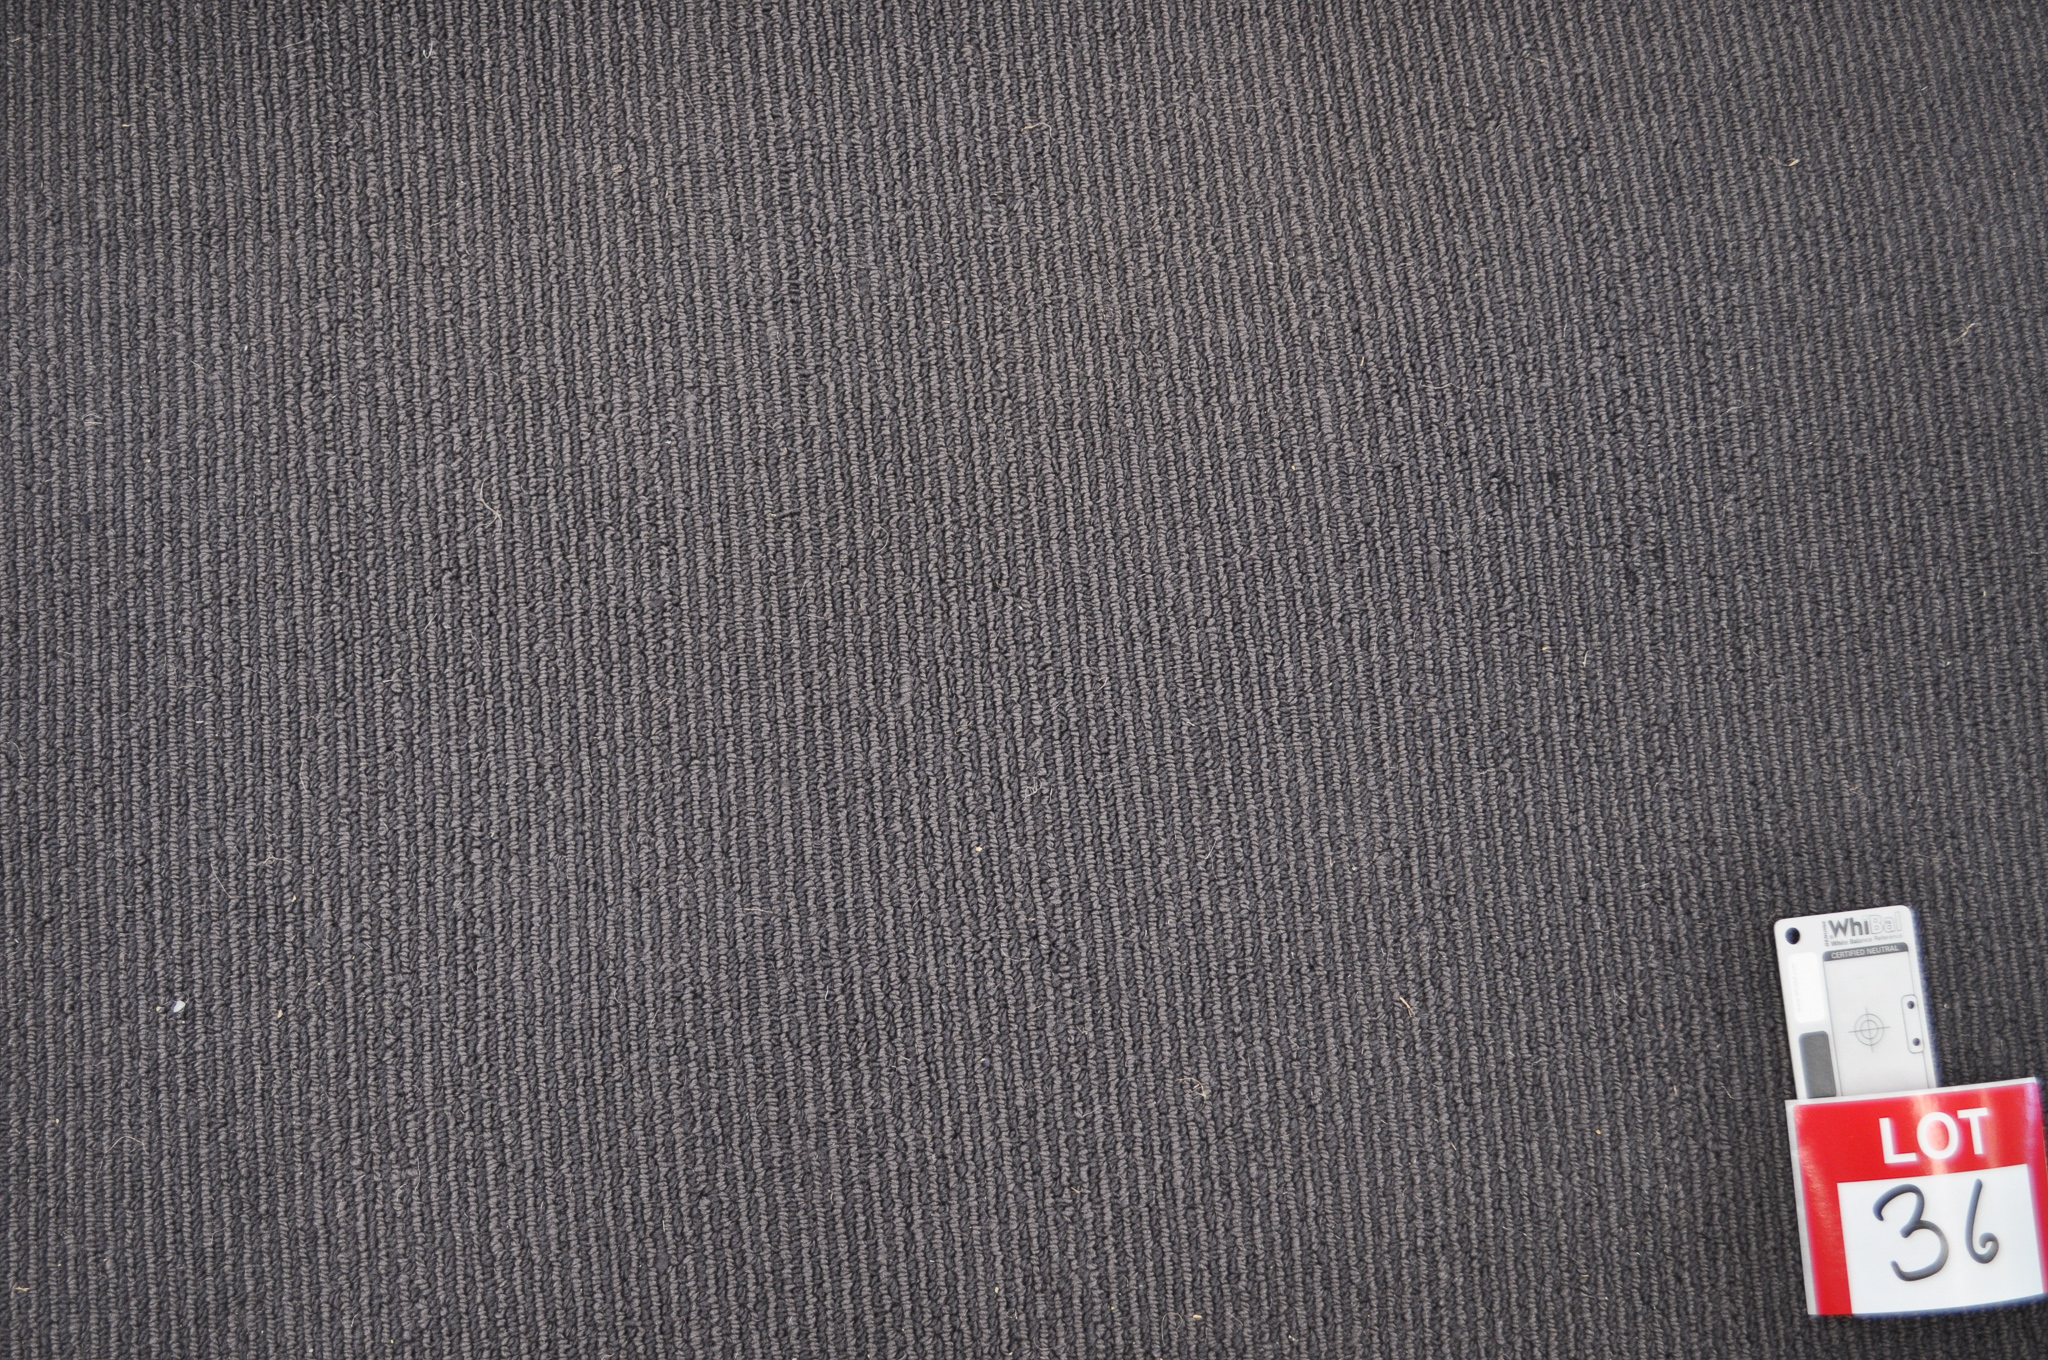 dark grey colored, sisal pile roll of carpet on sale at Concord Floors, it being a remnant roll in Concord Floor's warehouse.